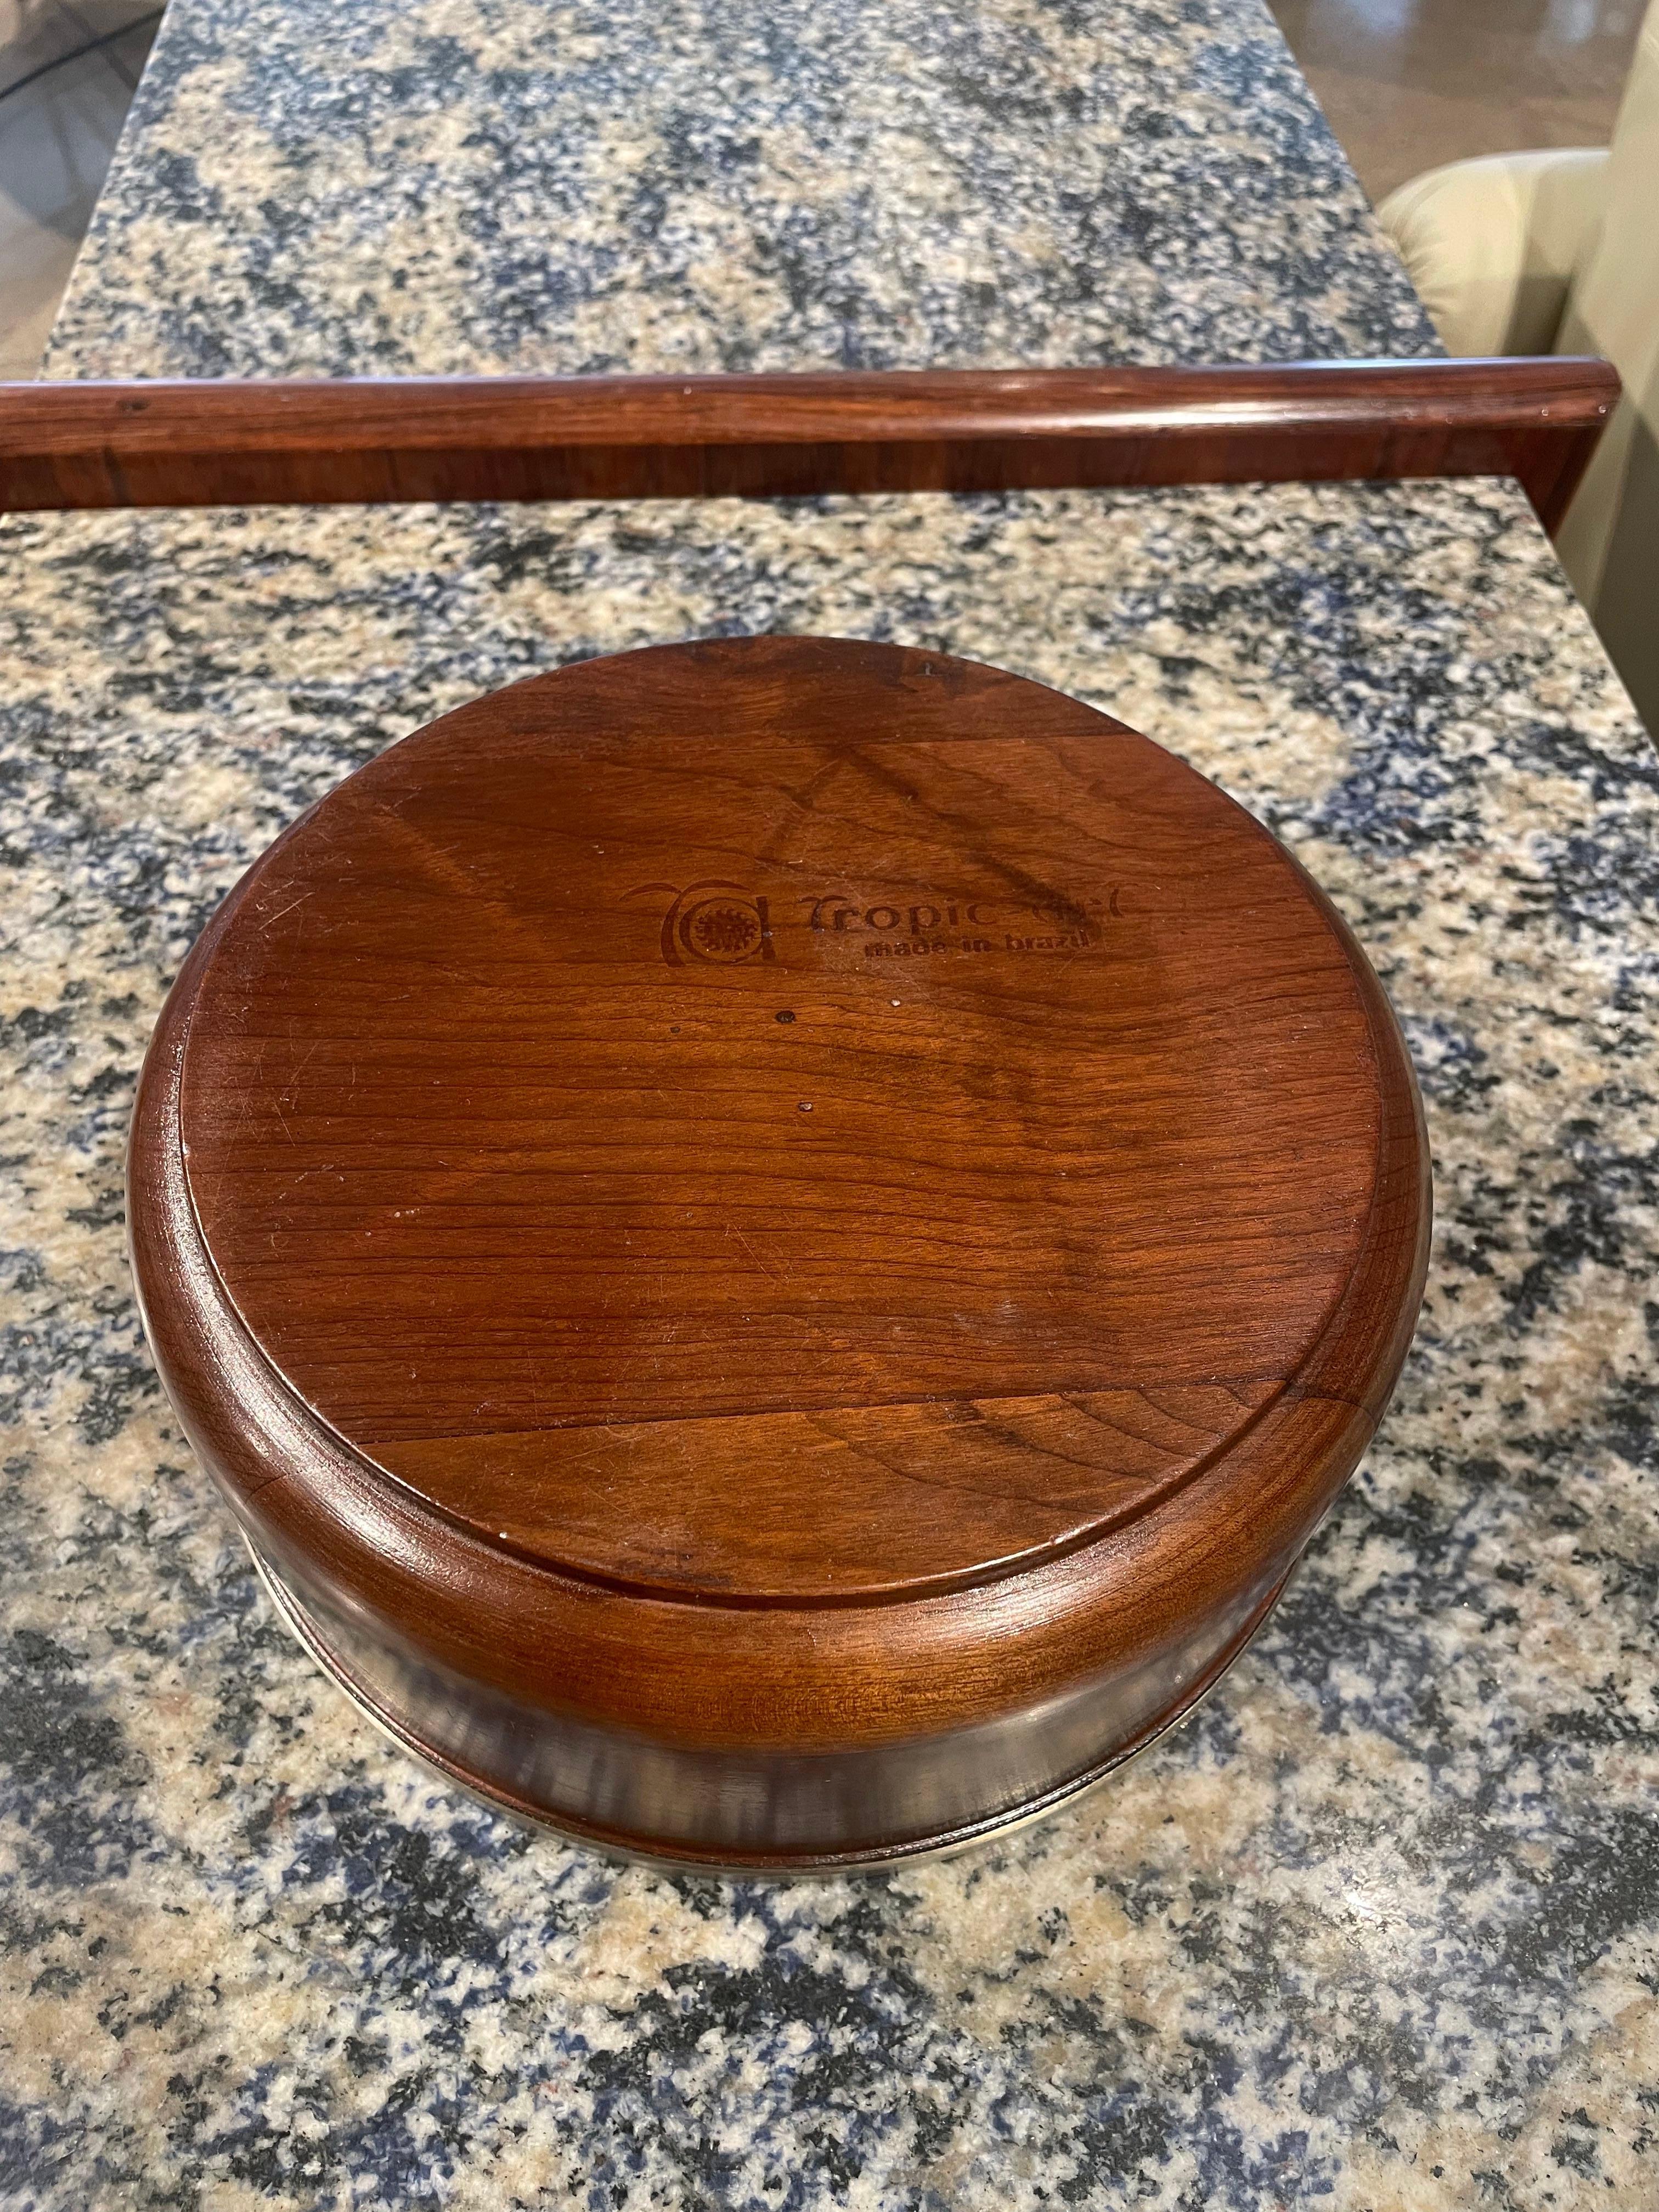 Woodwork Mid Century Modern Bowl in Brazilian Rosewood by Tropic Art